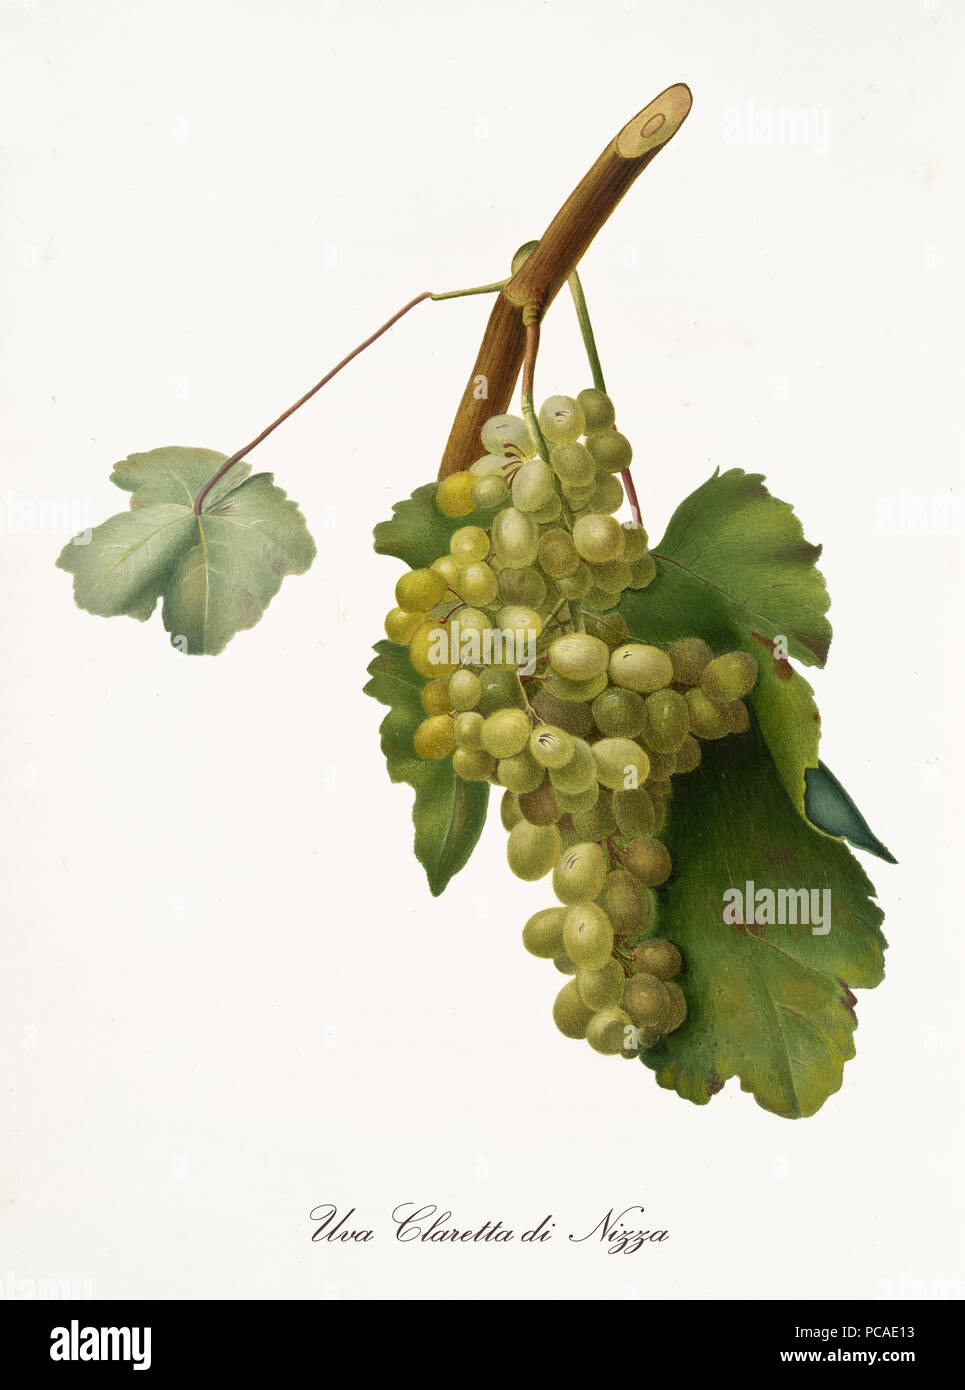 White grape on little part of vine branch with leaves. All the elements are isolated over white background. Old detailed botanical illustration by Giorgio Gallesio published in 1817, 1839 Stock Photo